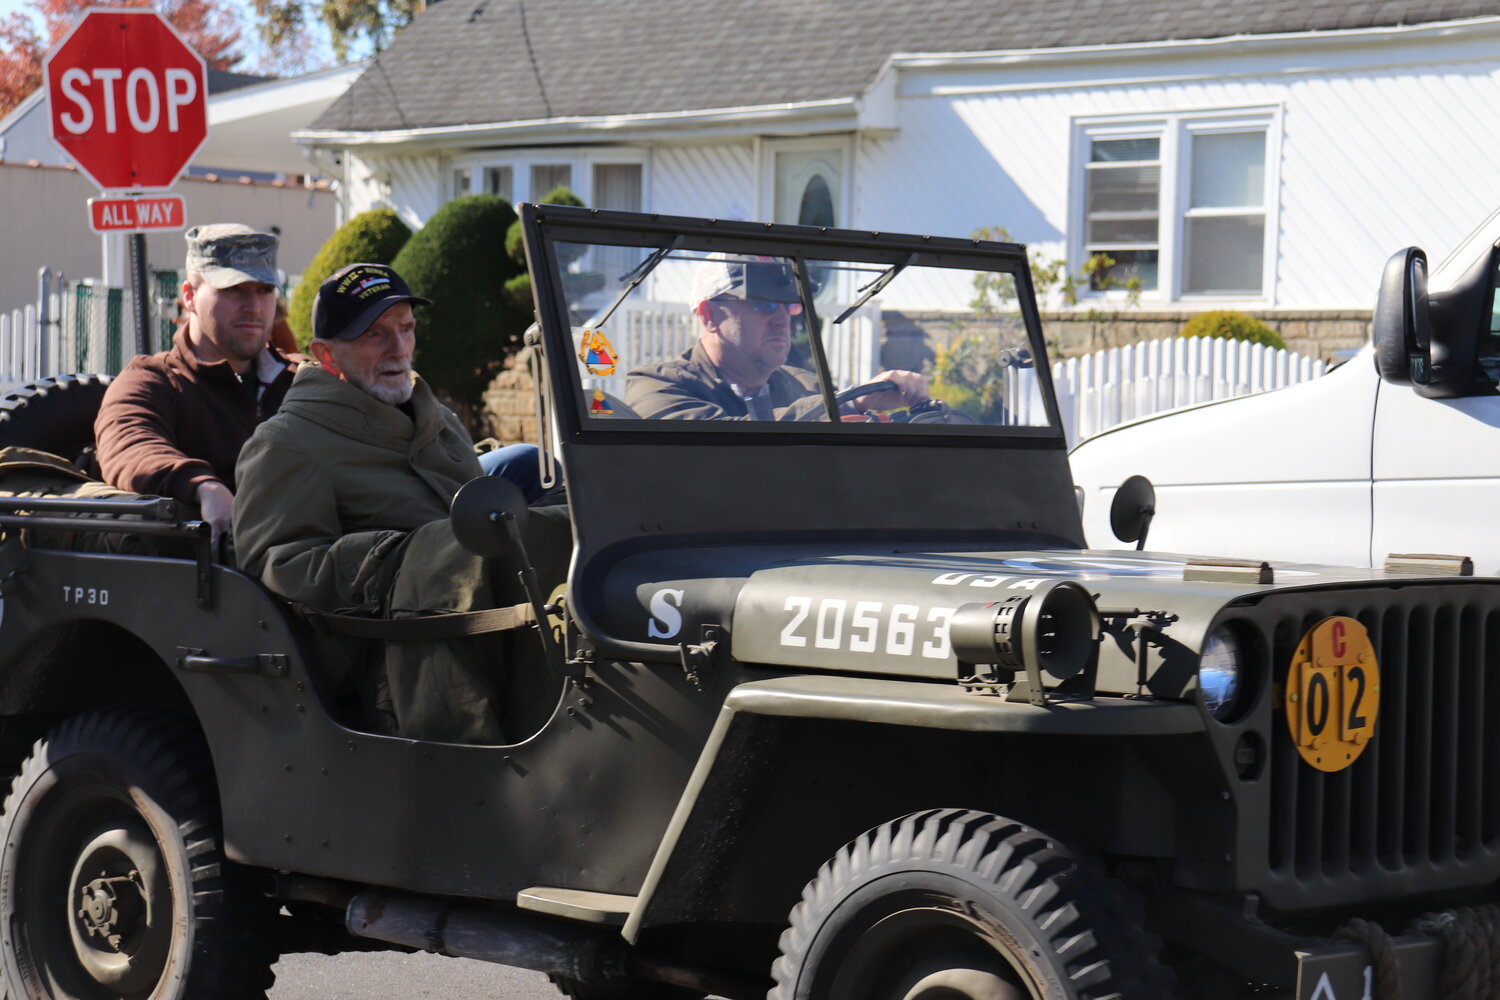 Matthew Berrell, an air force veteran who served in the Iraq War, rode with grandfather Ed Berrell, who served as a merchant marine in World War II and in the army during the Korean War, as father Matthew Berrell Sr. drove the car during the Veterans Day parade in Elmont on Nov. 11.